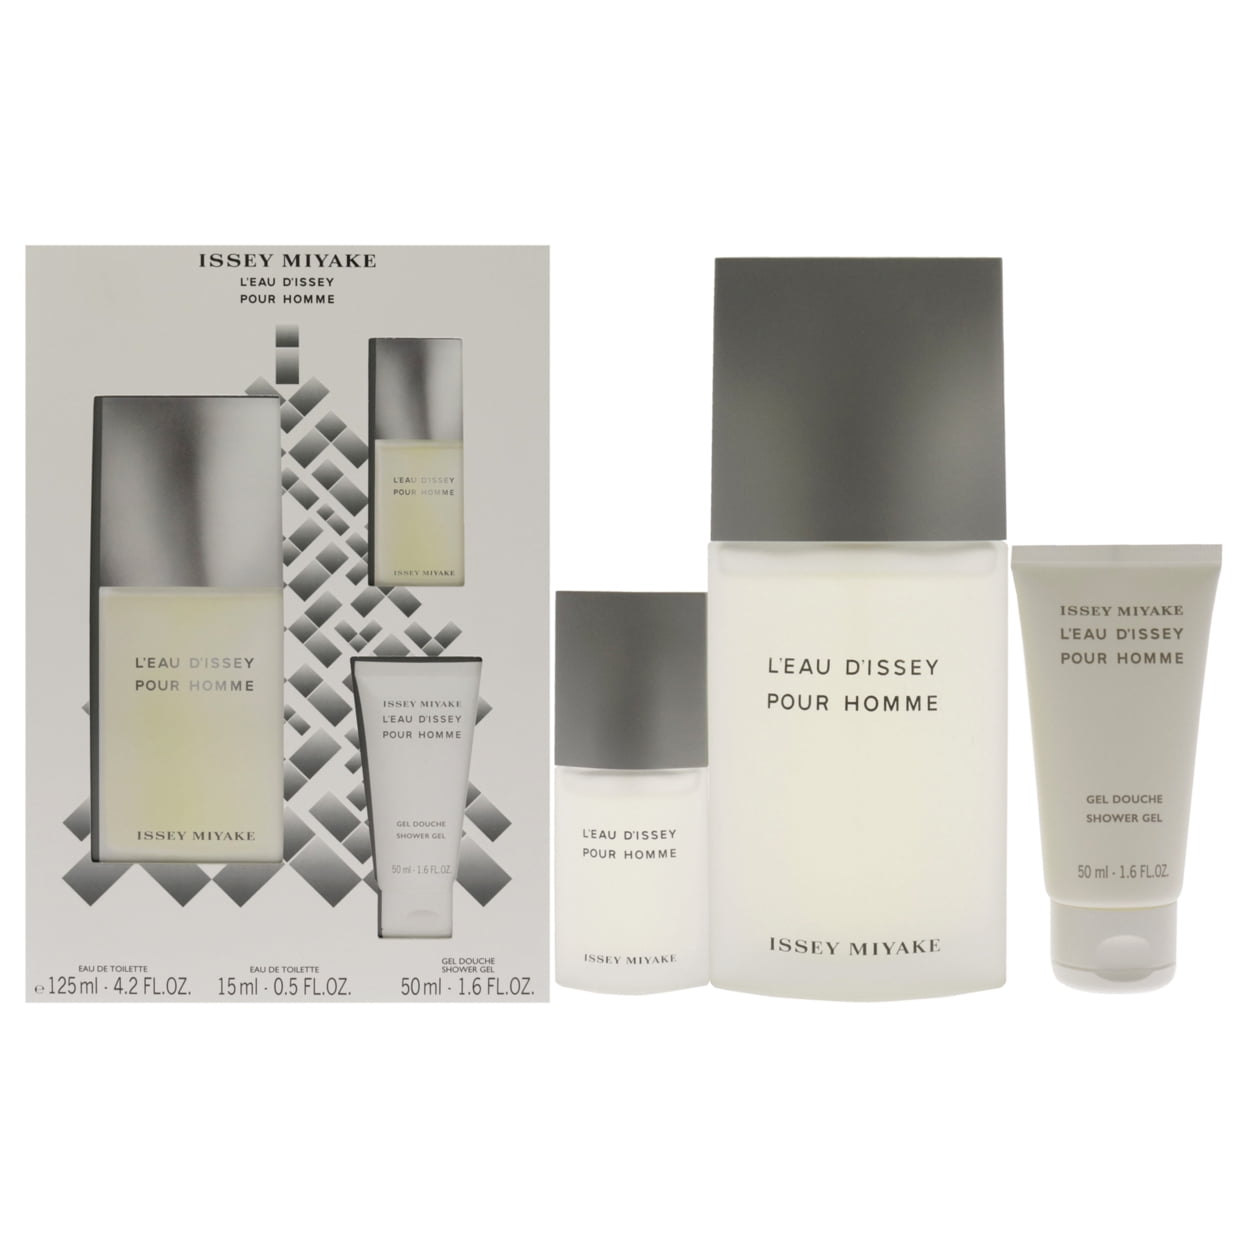 Leau Dissey Pour Homme by Issey Miyake for Men - 3 Pc Gift Set 4.2oz ...